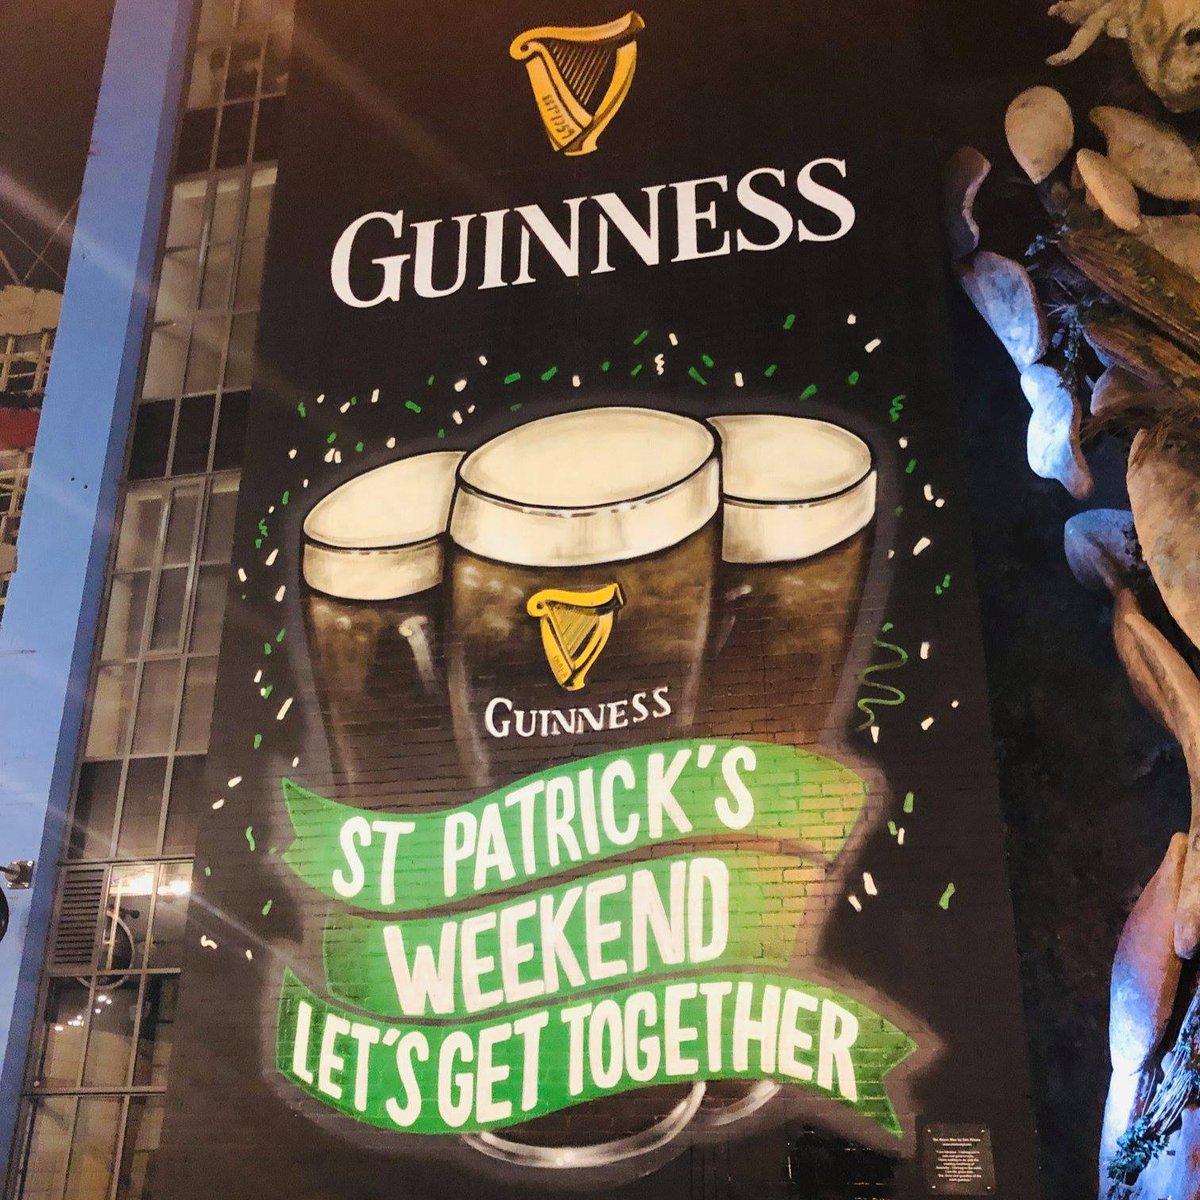 The days are counting down til #DigbethStPats... 🍀 Who remembers the Guinness mural on Gibb Street? 🍺 We can't wait to open our doors for the St. Patrick's festival again this year, sláinte Digbeth!